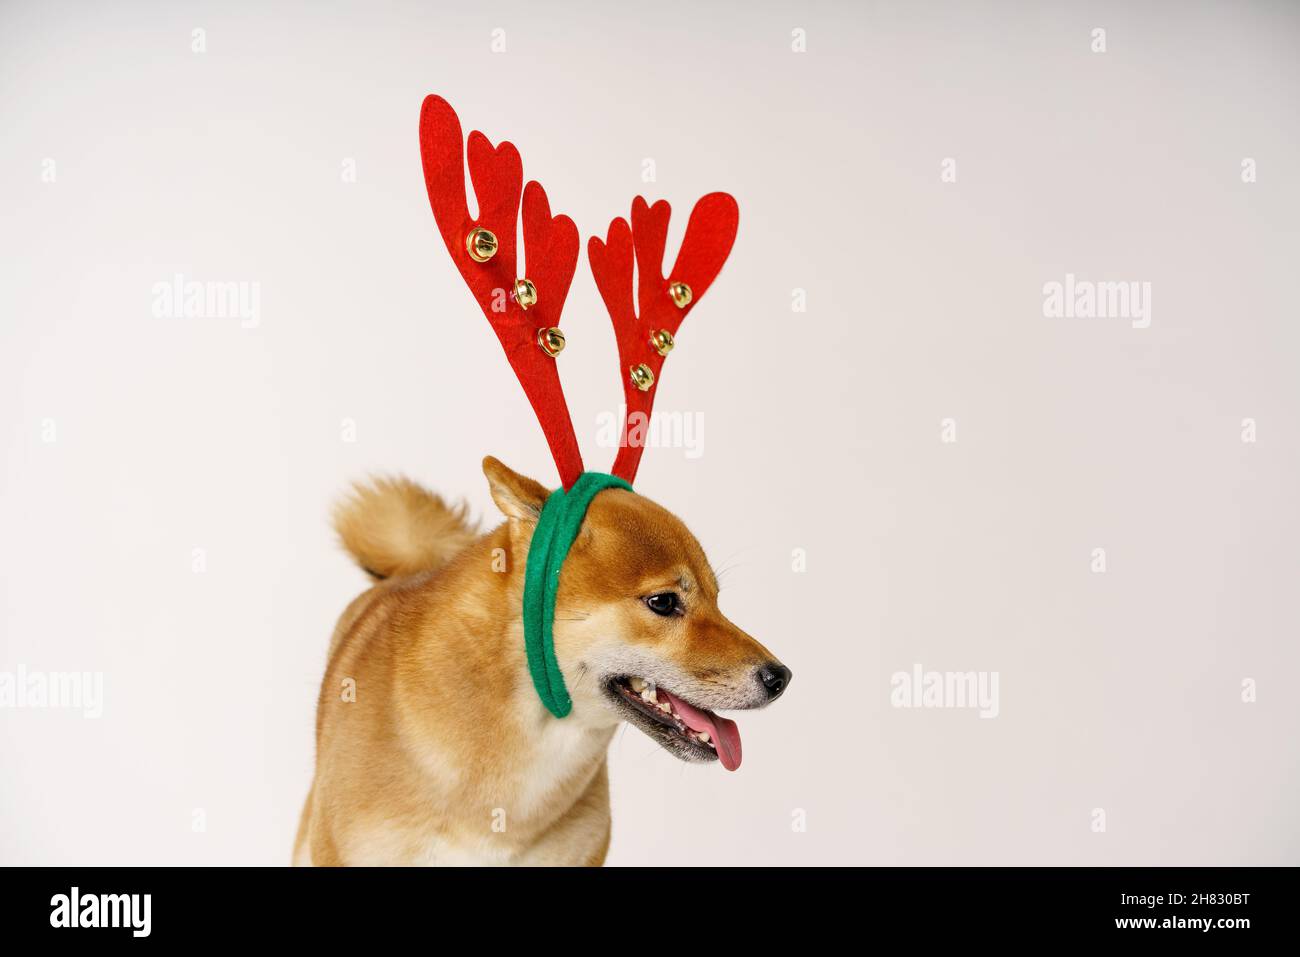 New year and christmas concept with dog wearing red deer antlers headband on solid light background Stock Photo